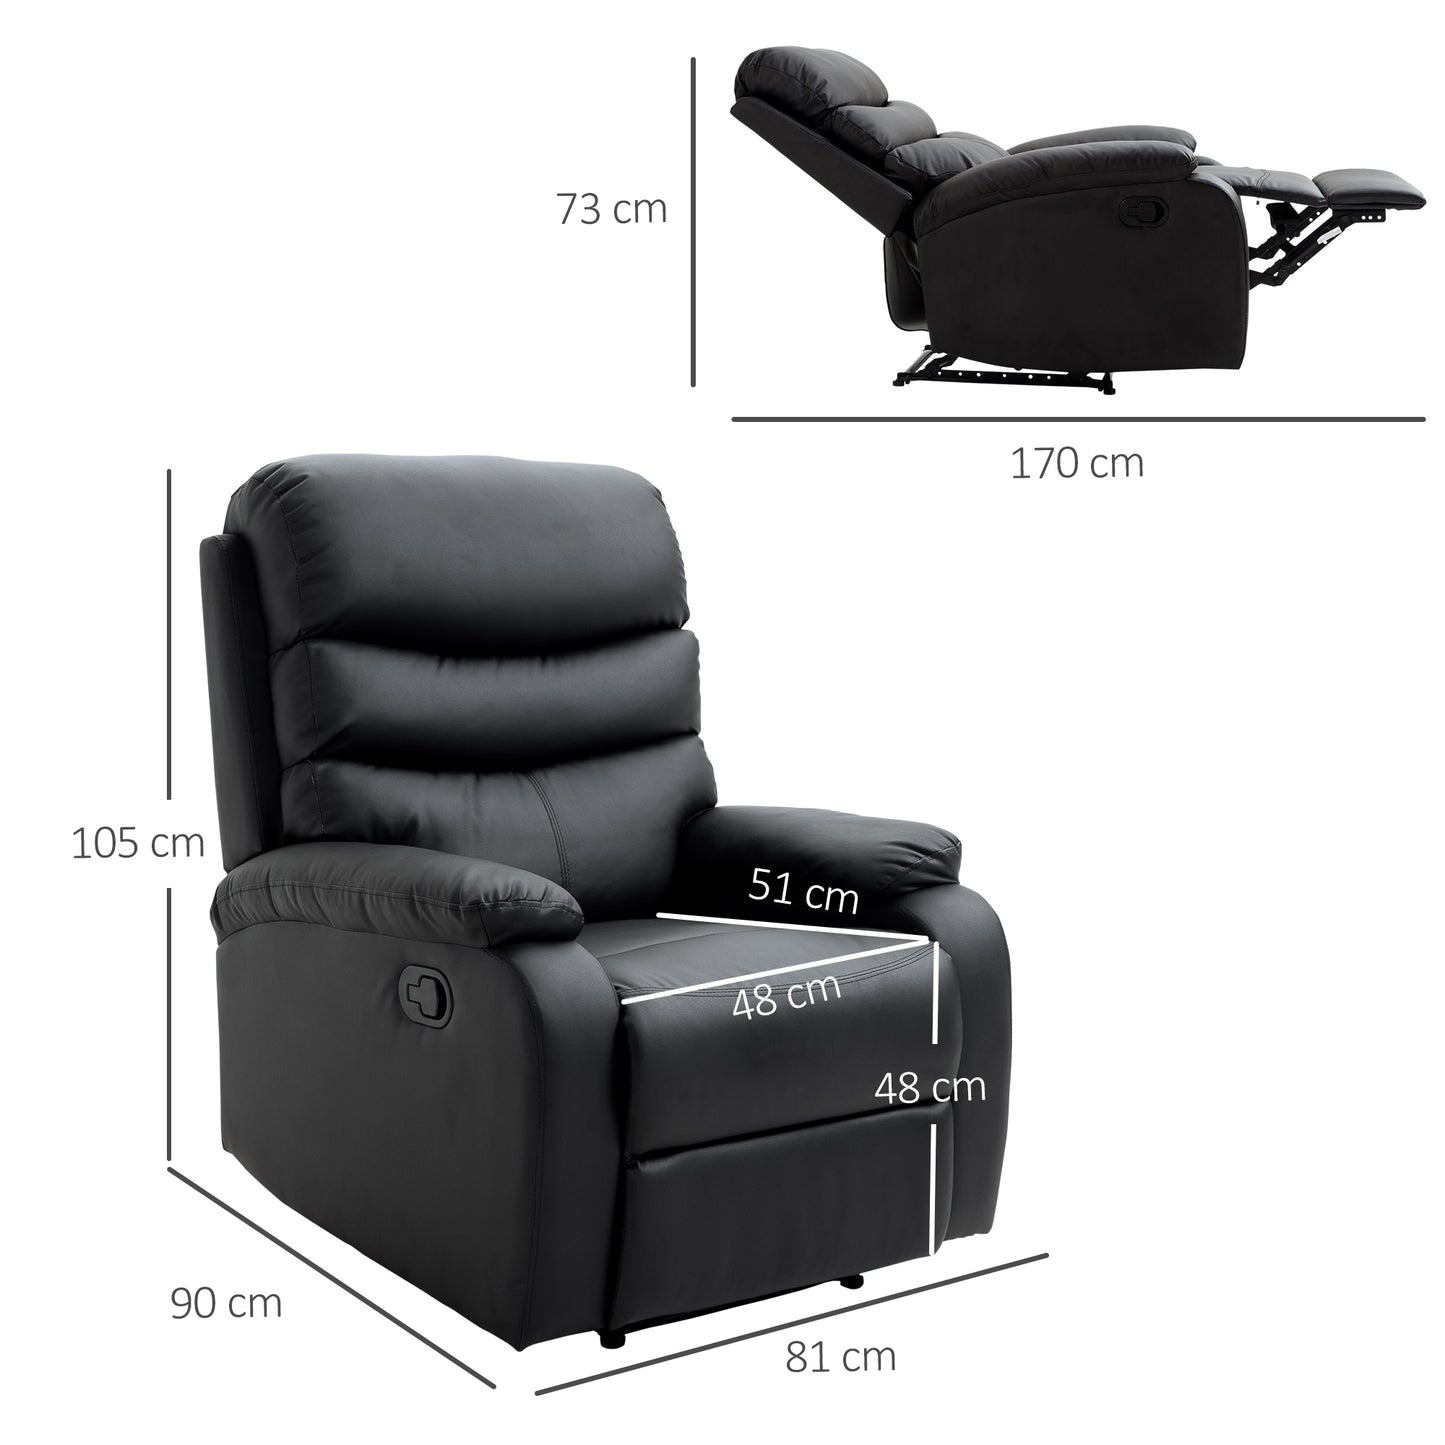 HOMCOM PU Leather Reclining Chair, Manual Recliner Chair with Padded Armrests, Retractable Footrest and Wood Frame, Black